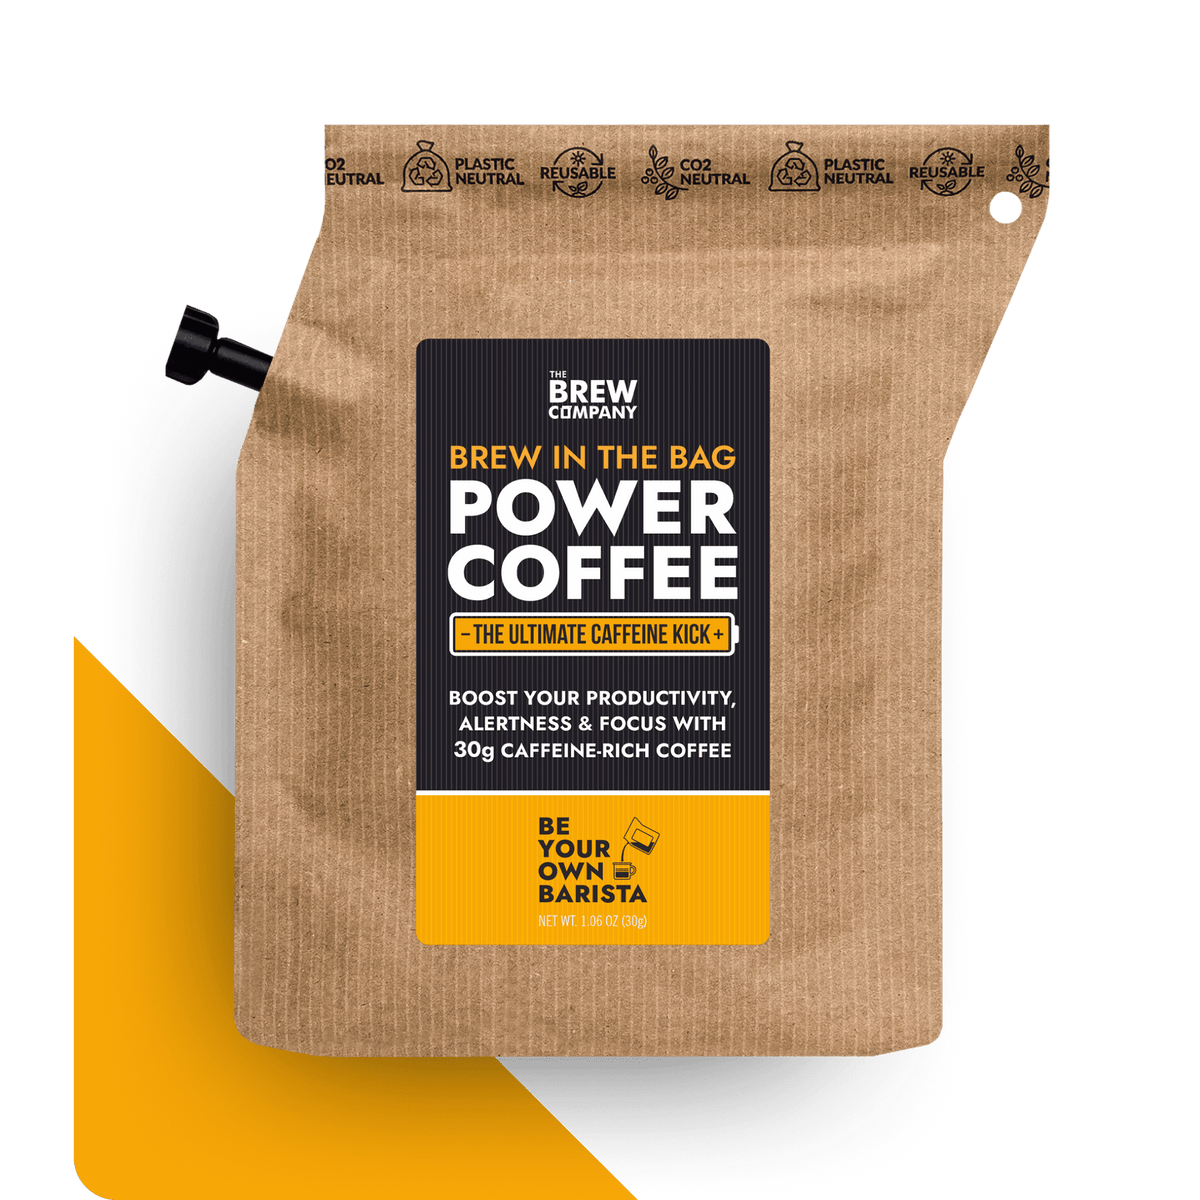 POWER COFFEE HOUSE BLEND COFFEEBREWER 80 pcs